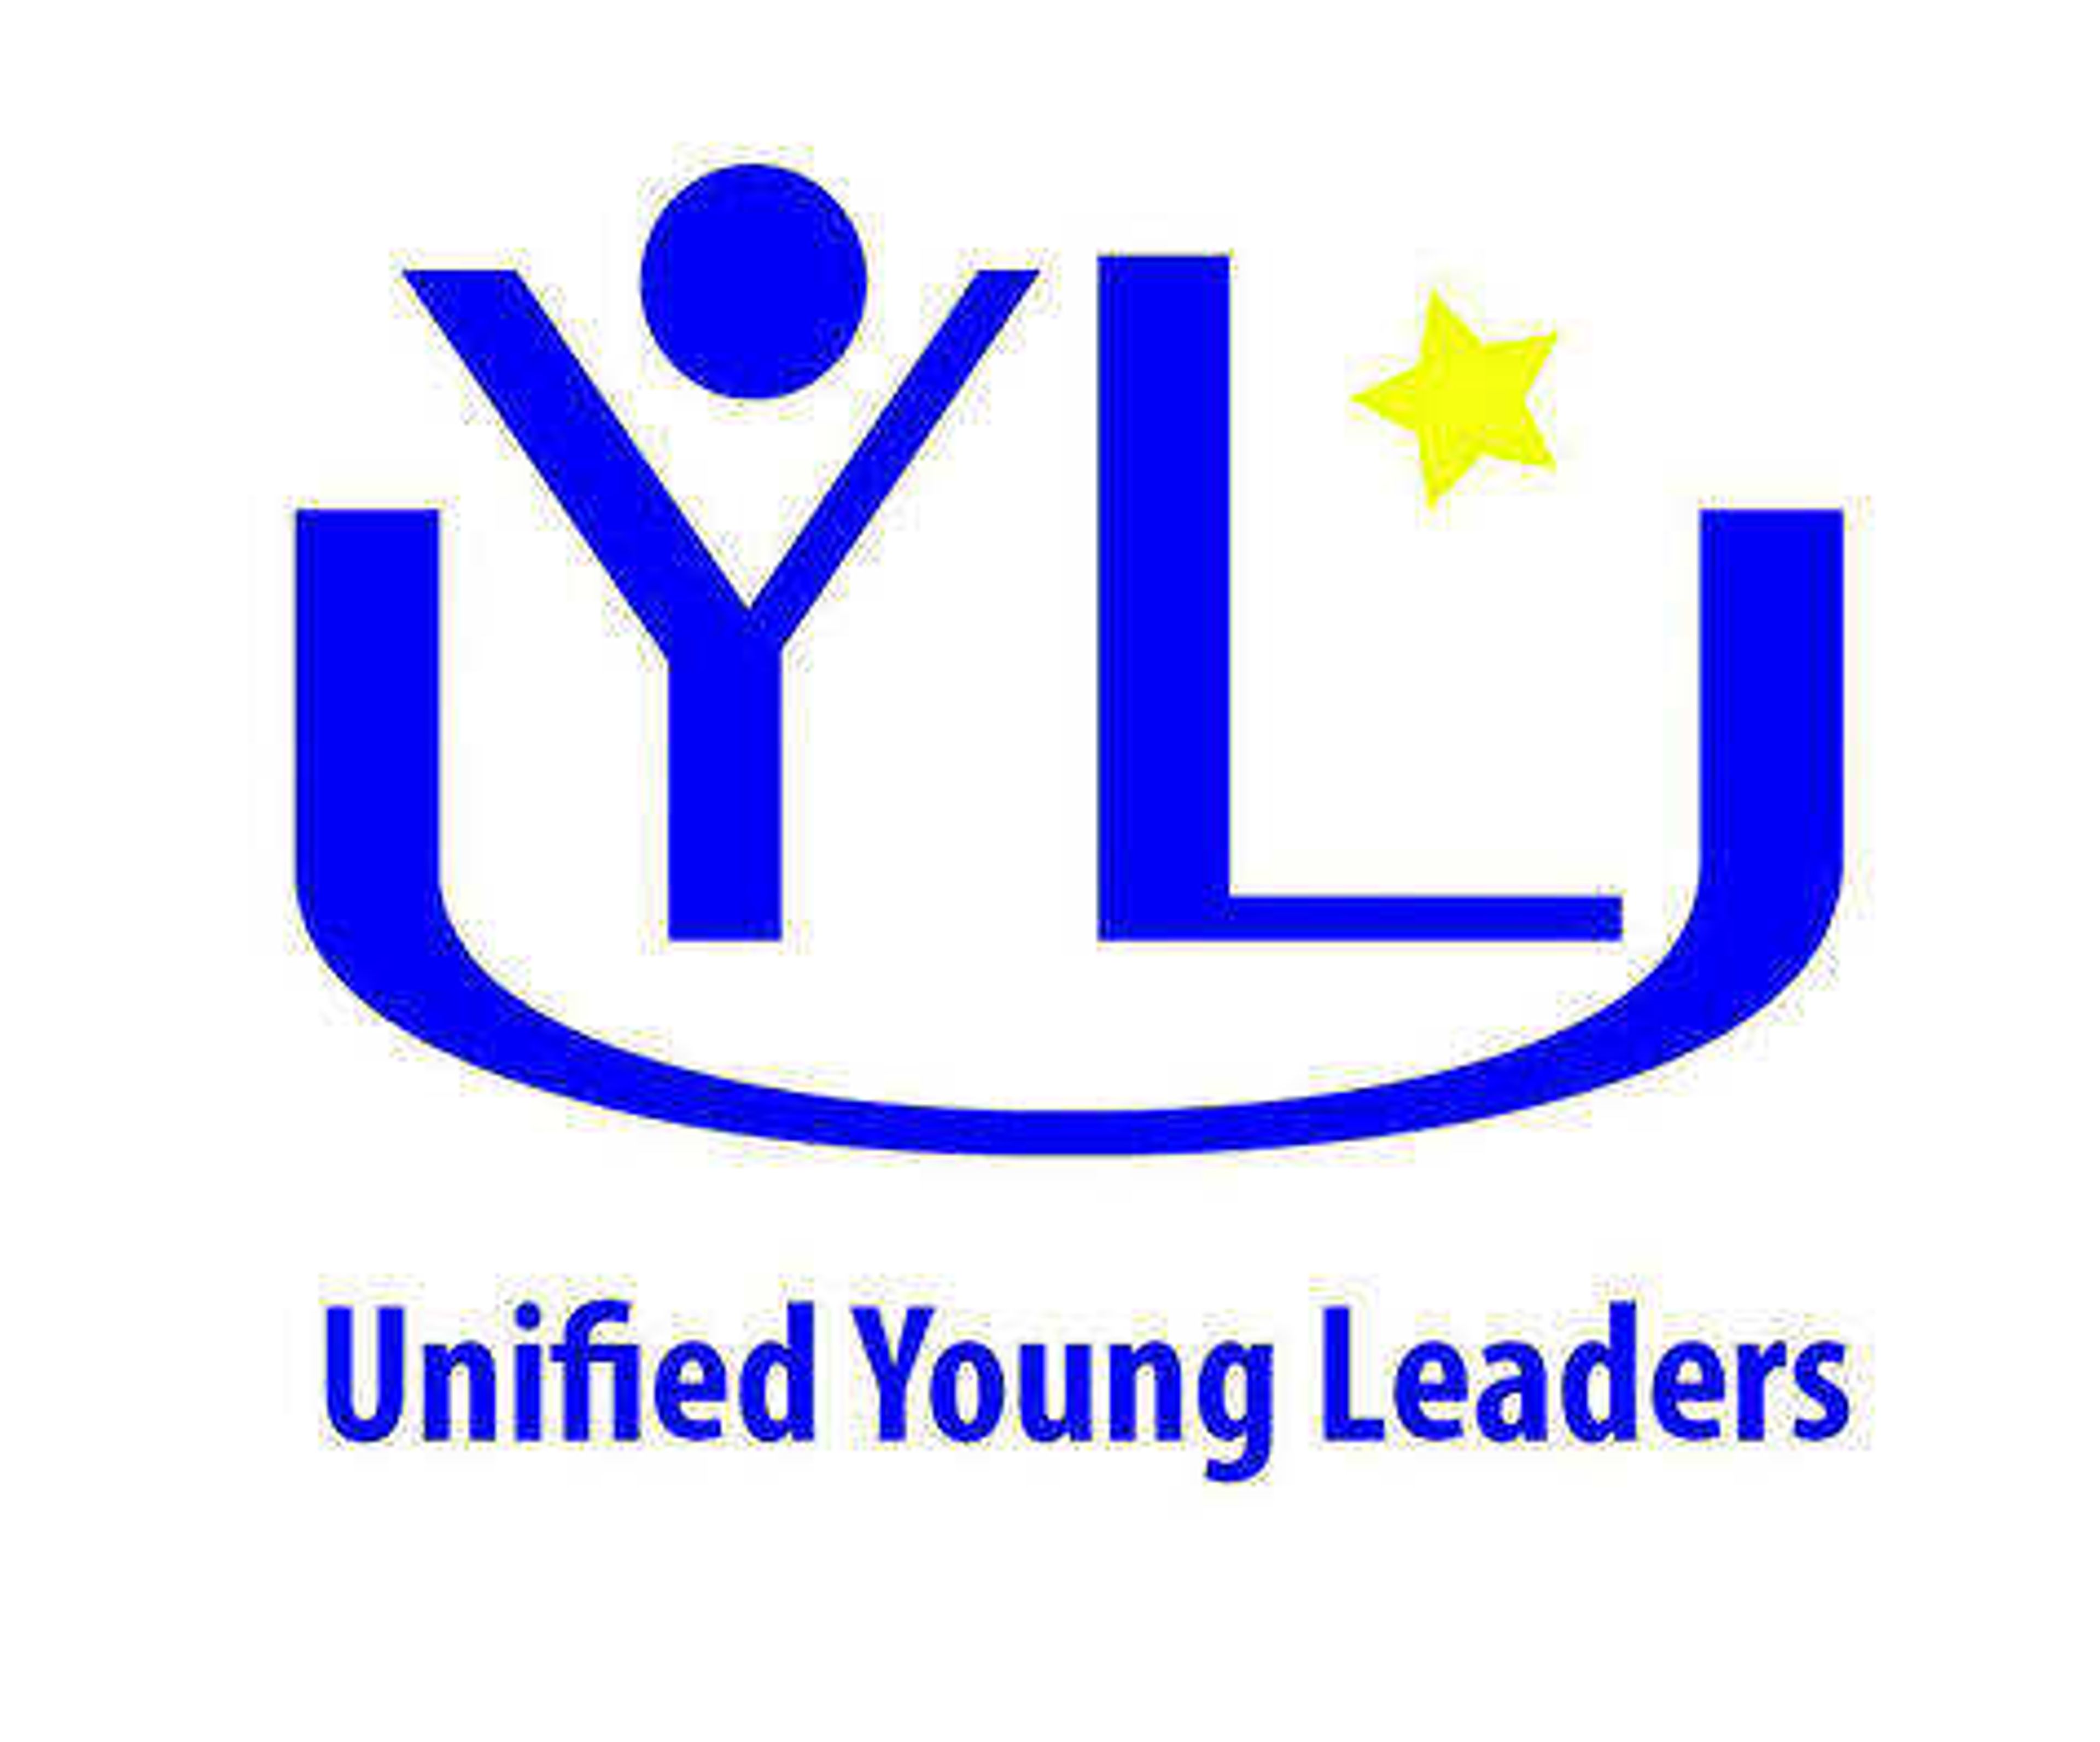 The Unified Young Leaders is a new organization dedicated to making a worldwide impact and creating a network of young international leaders.